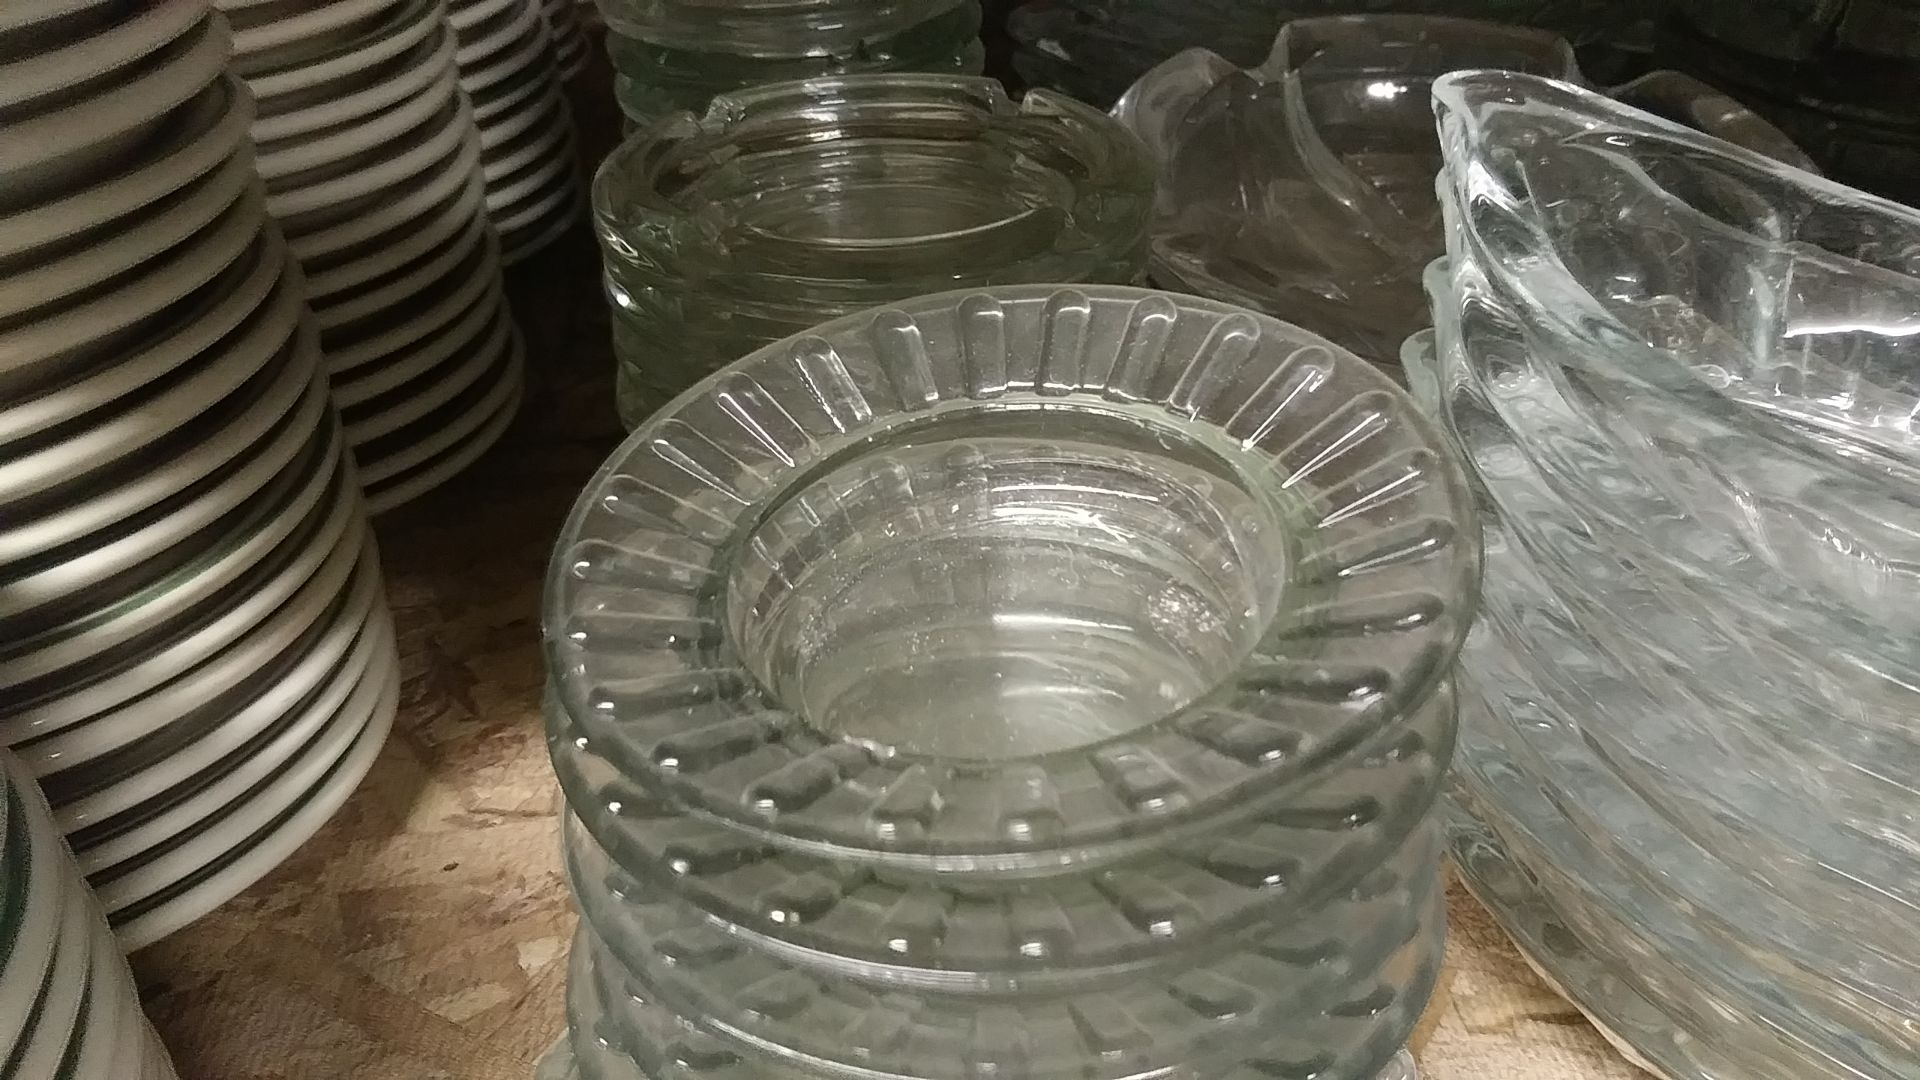 ASSORTED 4" DIA ROUND GLASS ASHTRAYS (includes QTY 39 in this lot) - Image 2 of 4